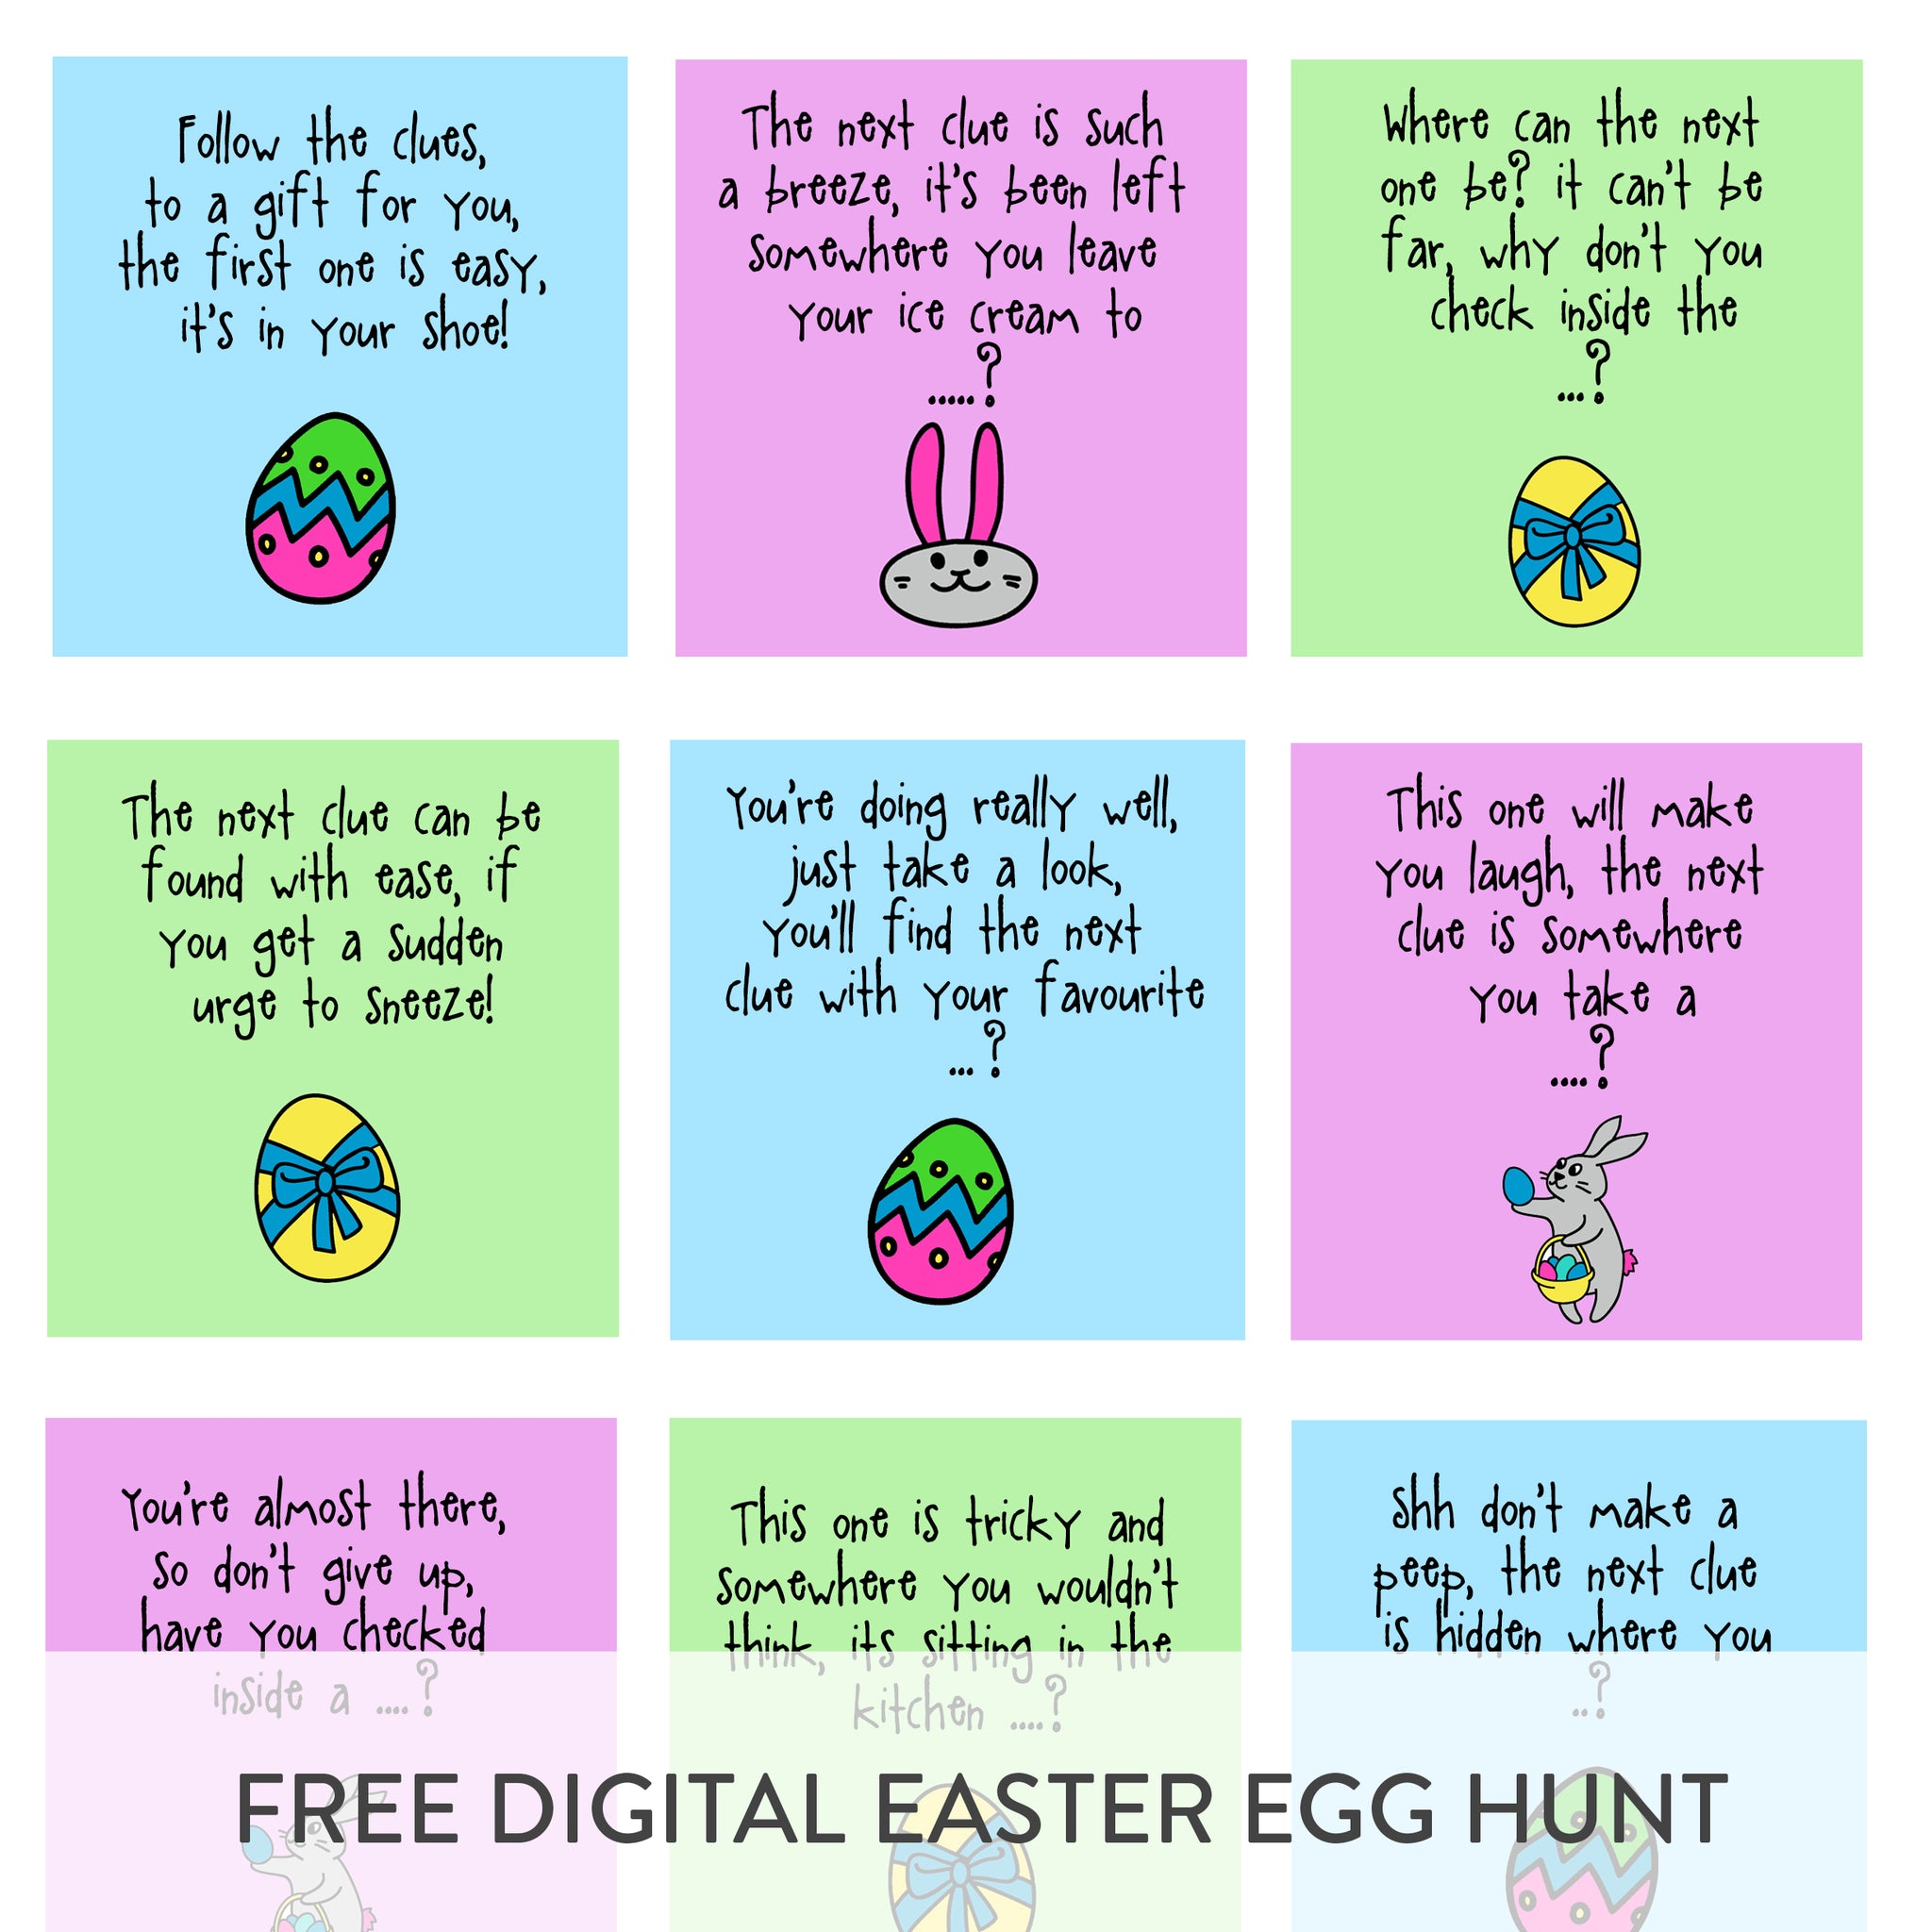 Funny Easter Card Happy Easter to One Hot Piece of Tail 